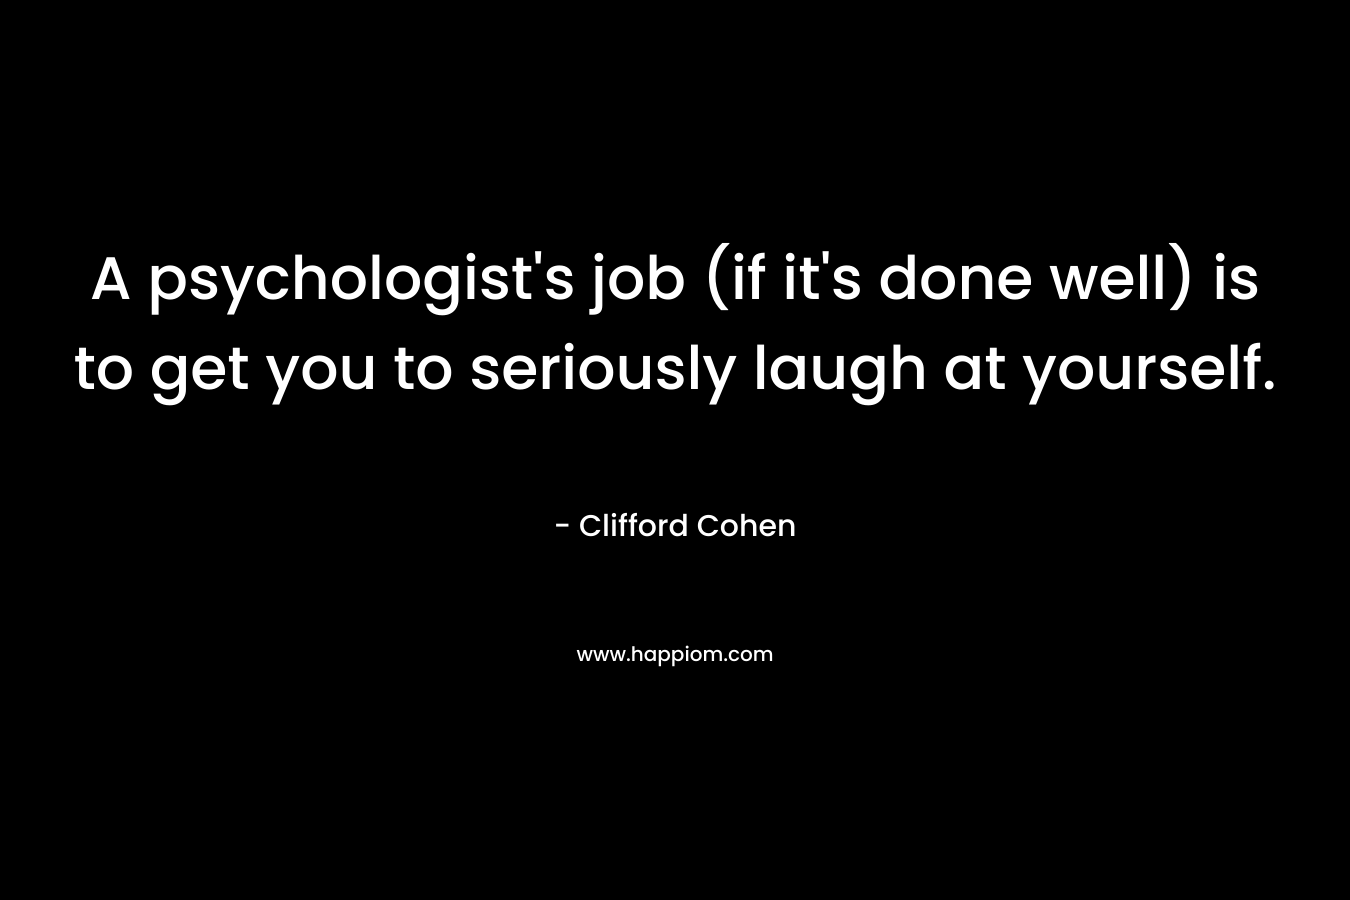 A psychologist’s job (if it’s done well) is to get you to seriously laugh at yourself. – Clifford Cohen